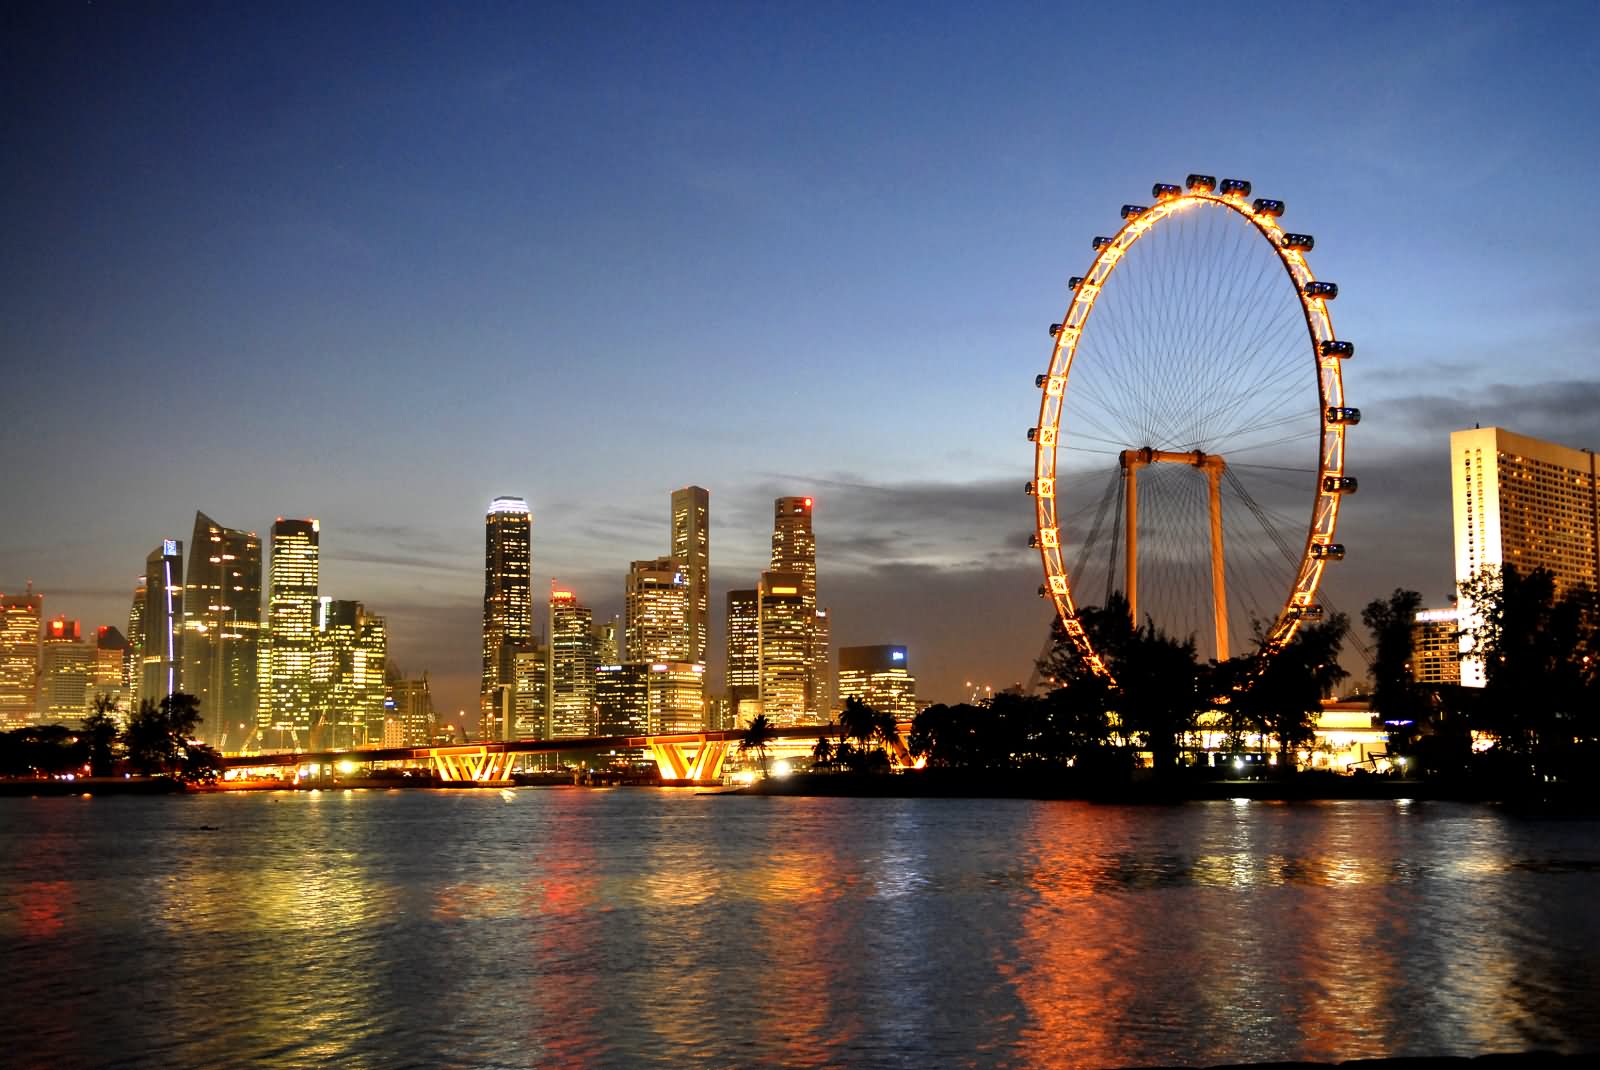 Beautiful Night View Of Singapore Flyer And City Buildings